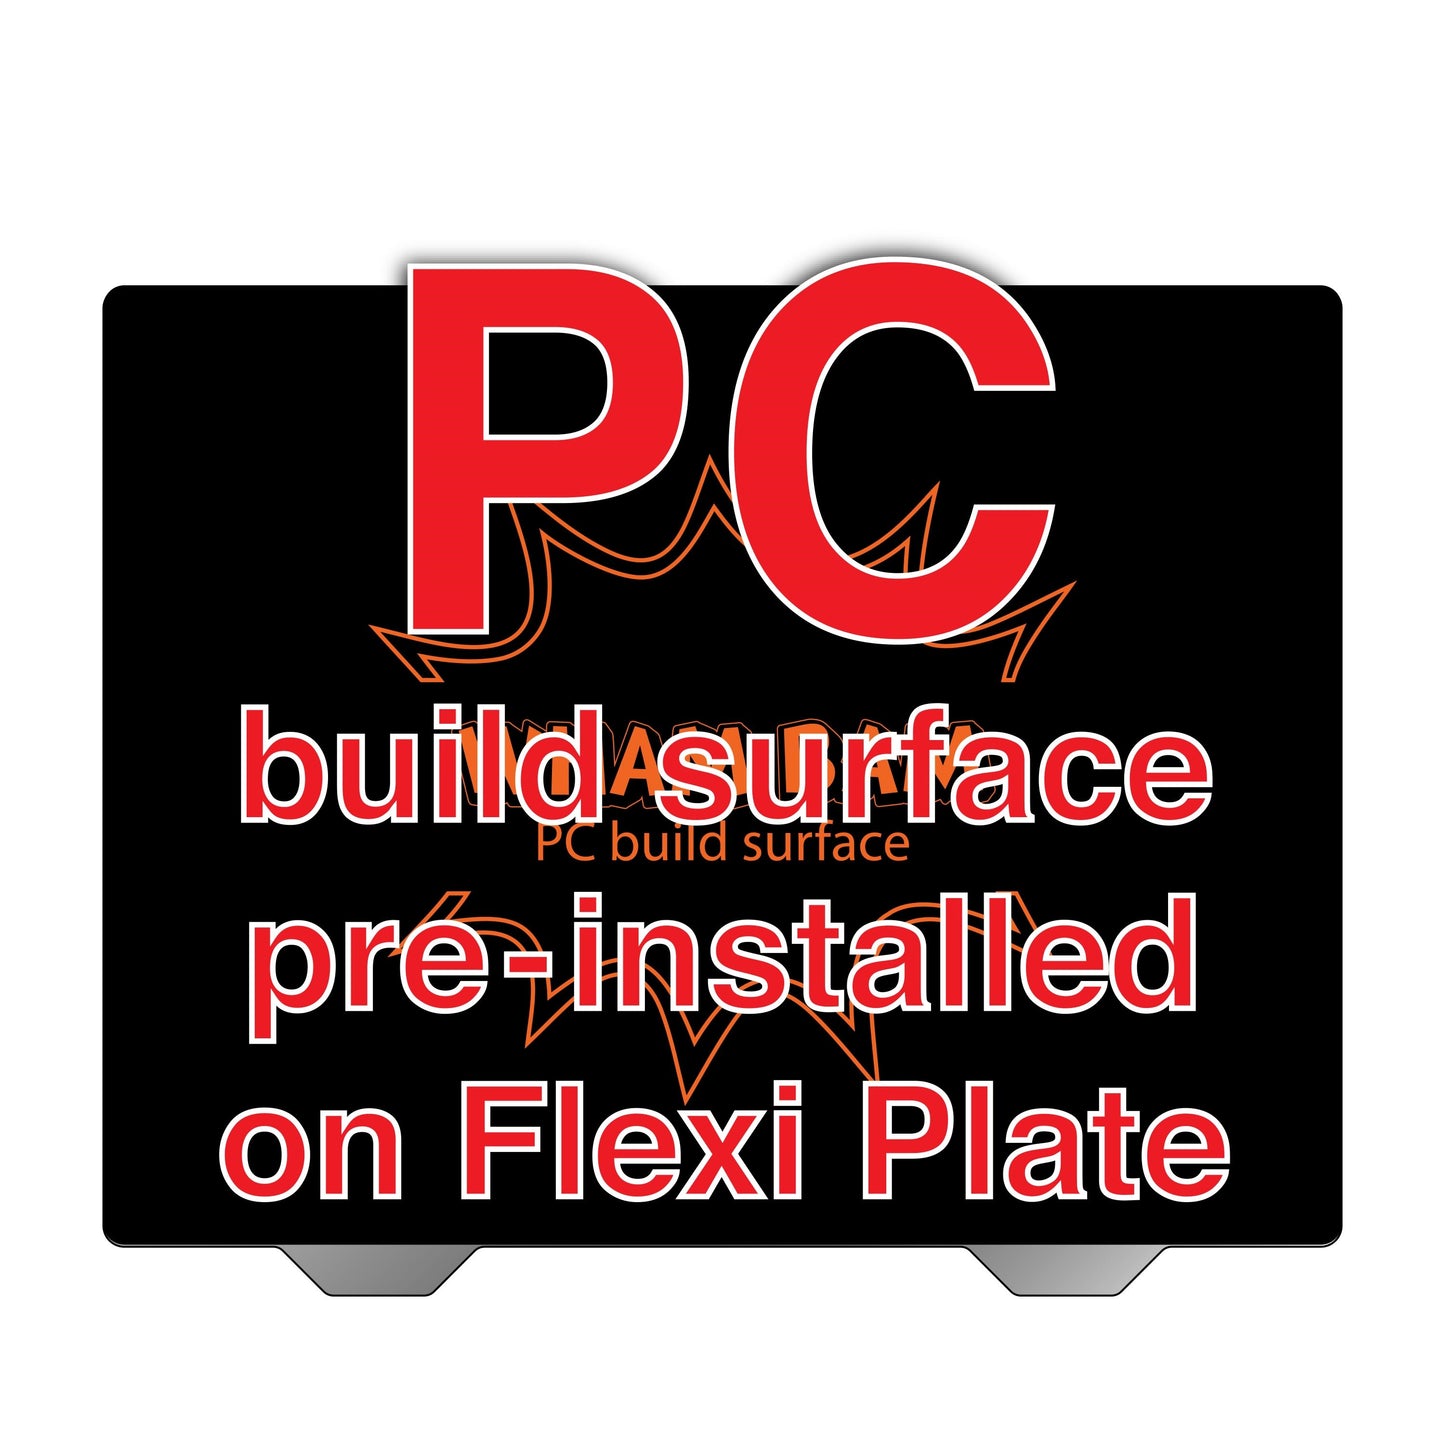 Flexi Plate with Pre-Installed PC Build Surface (Classic Black) - 355 x 275 - UltiMaker S5